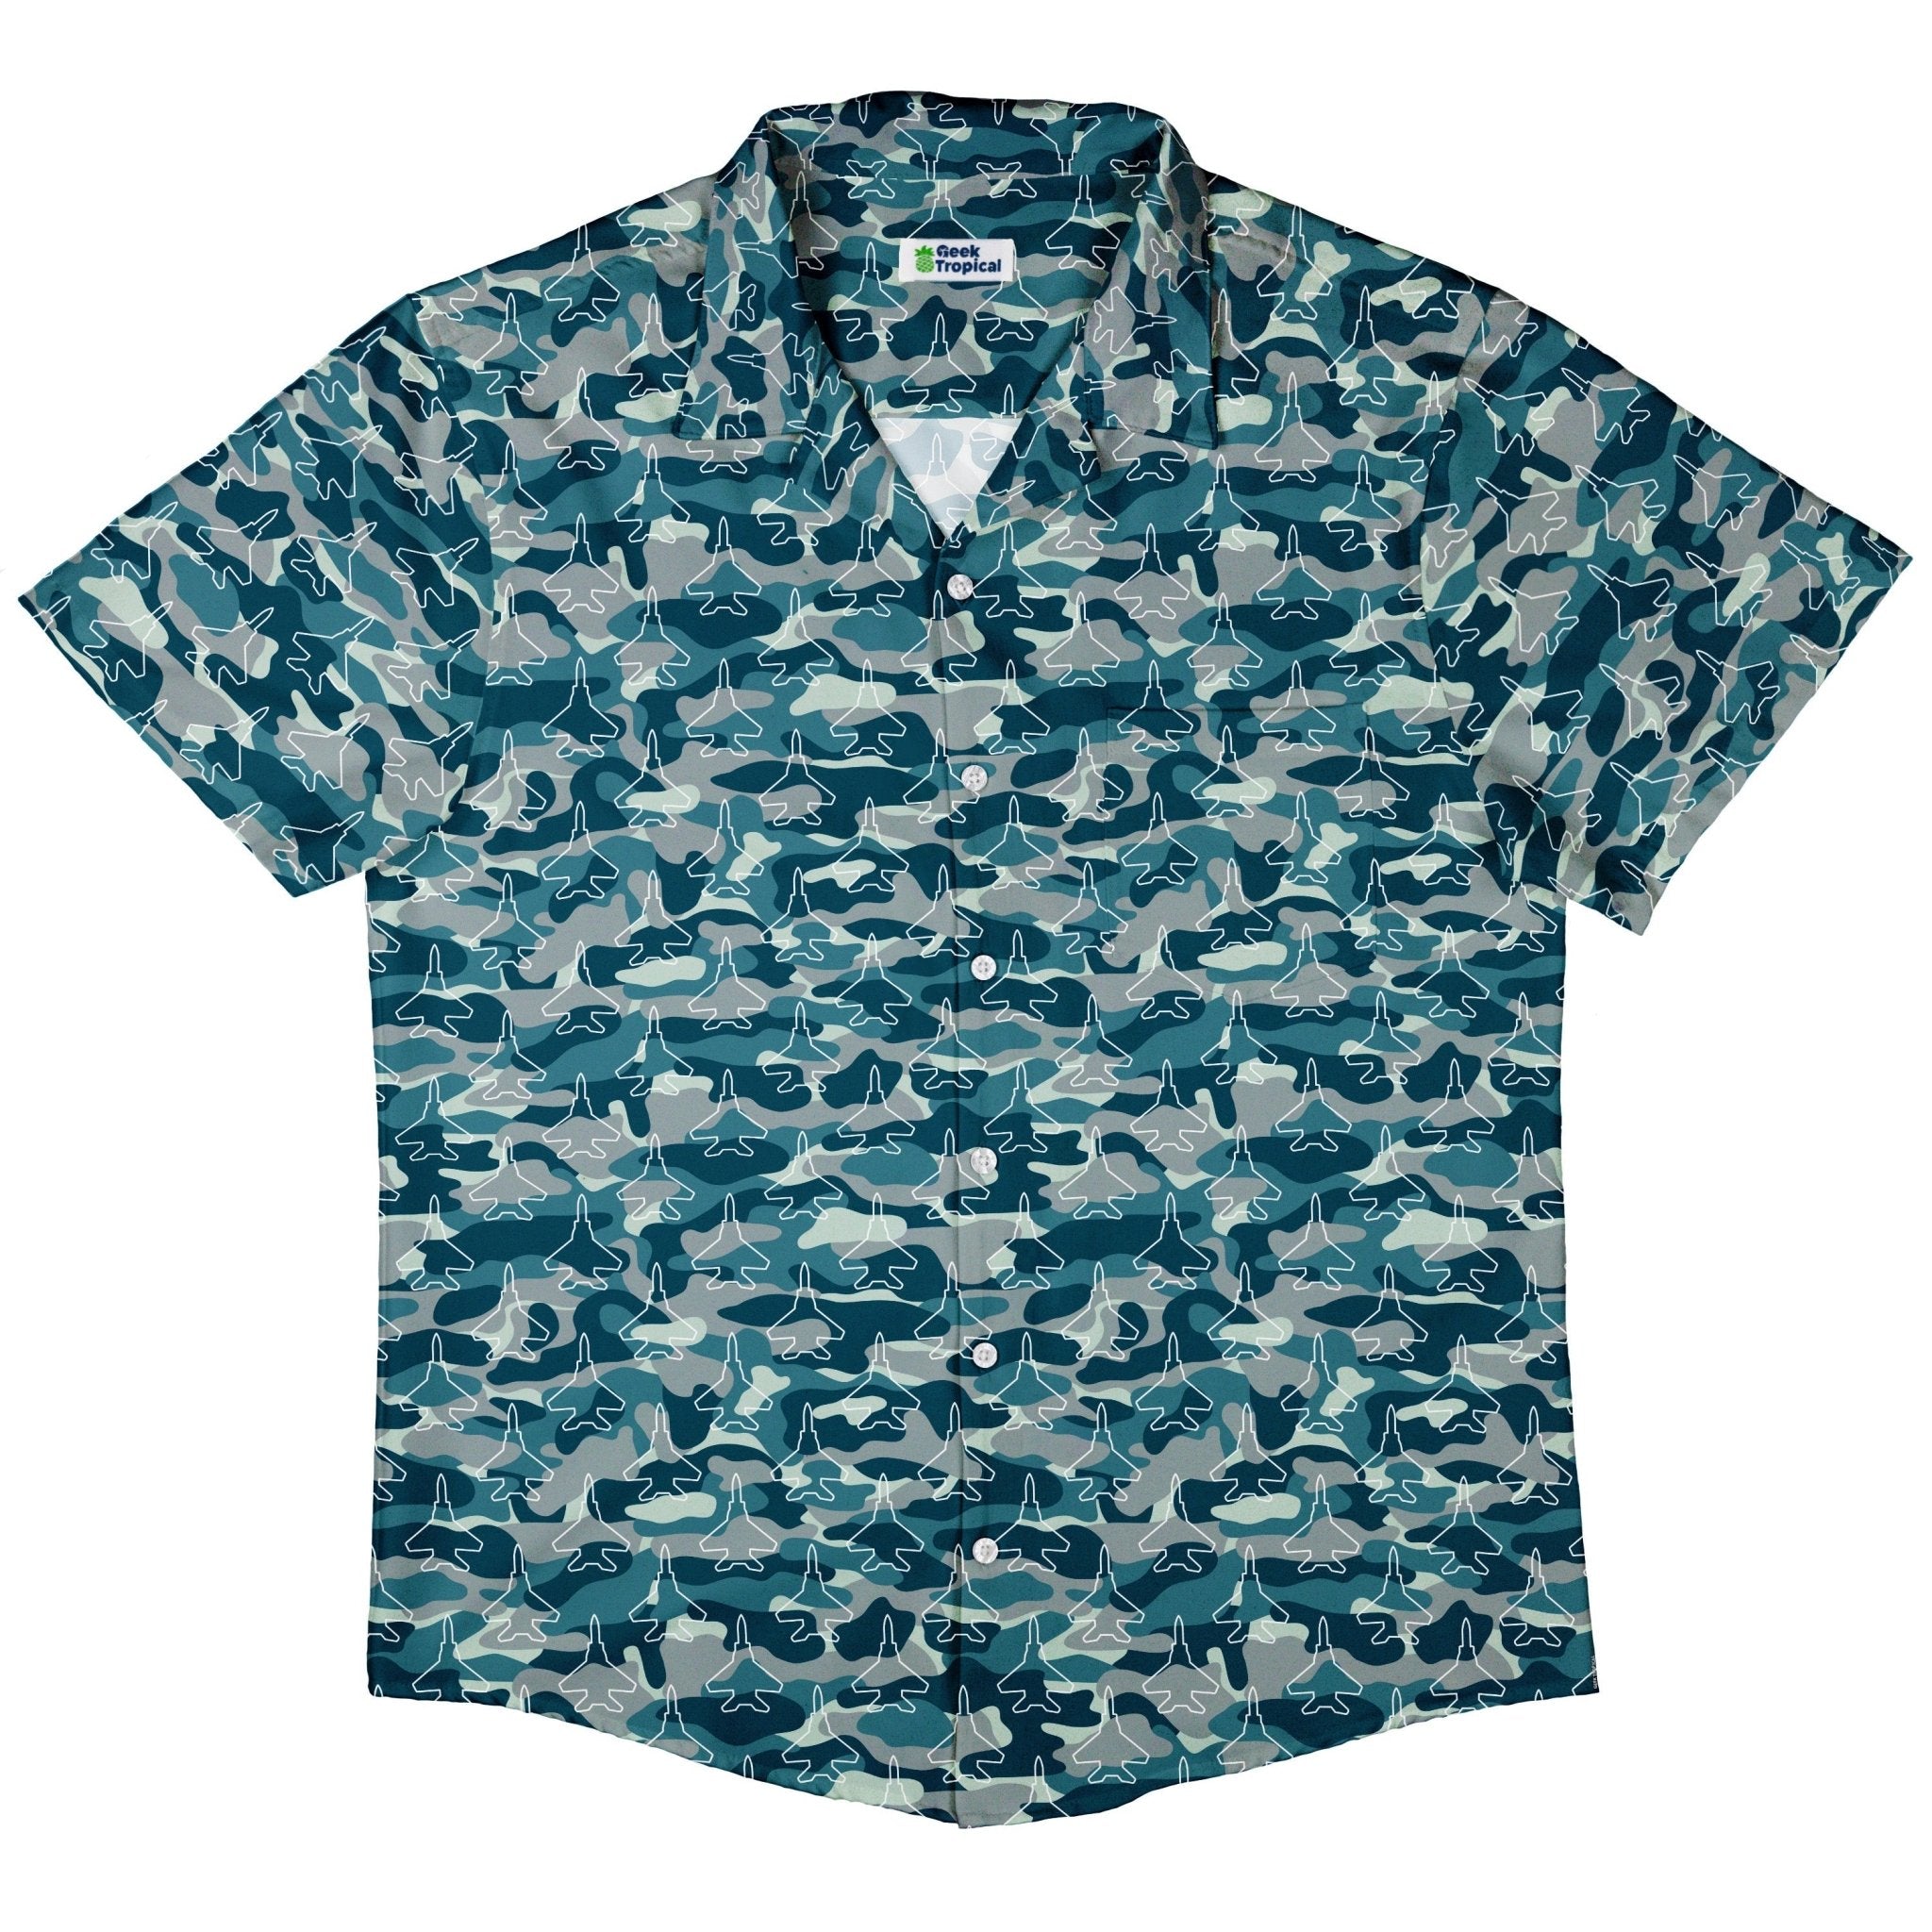 Military Fighter Jet Navy Camo Blue Button Up Shirt - adult sizing - aviation print -